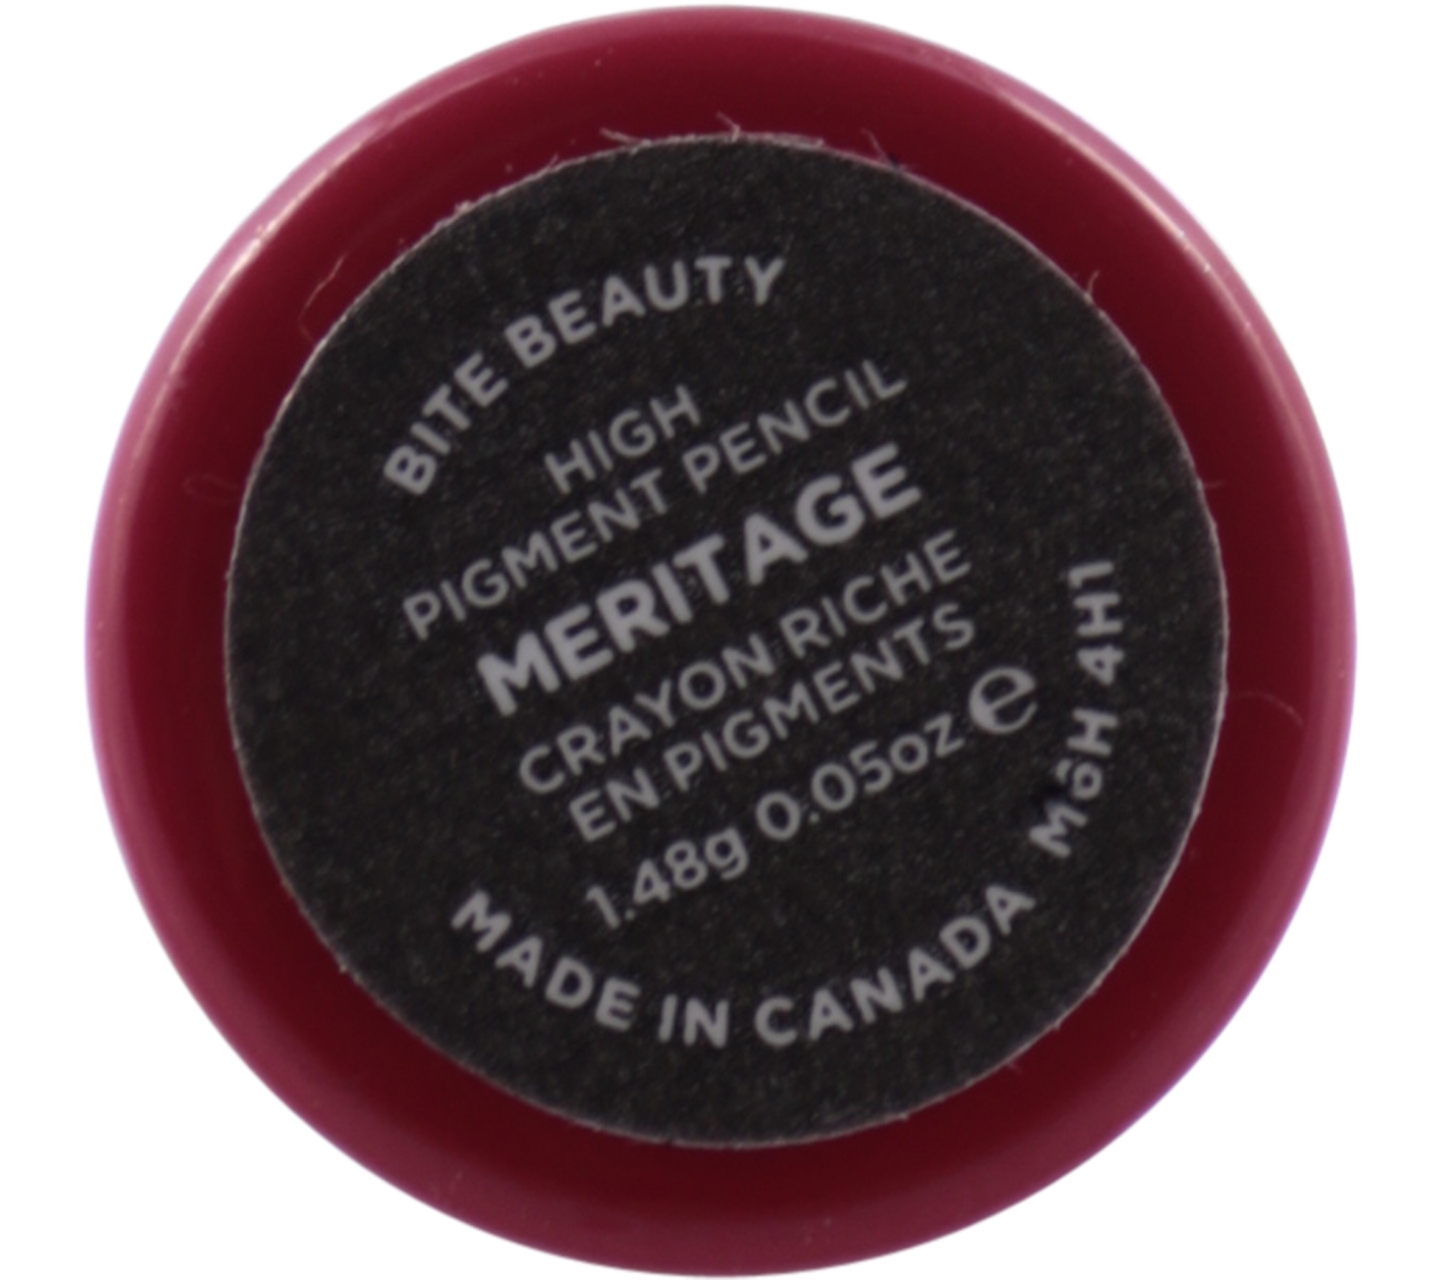 Bite Beauty Red Meritage High Pigment Pencil Lips